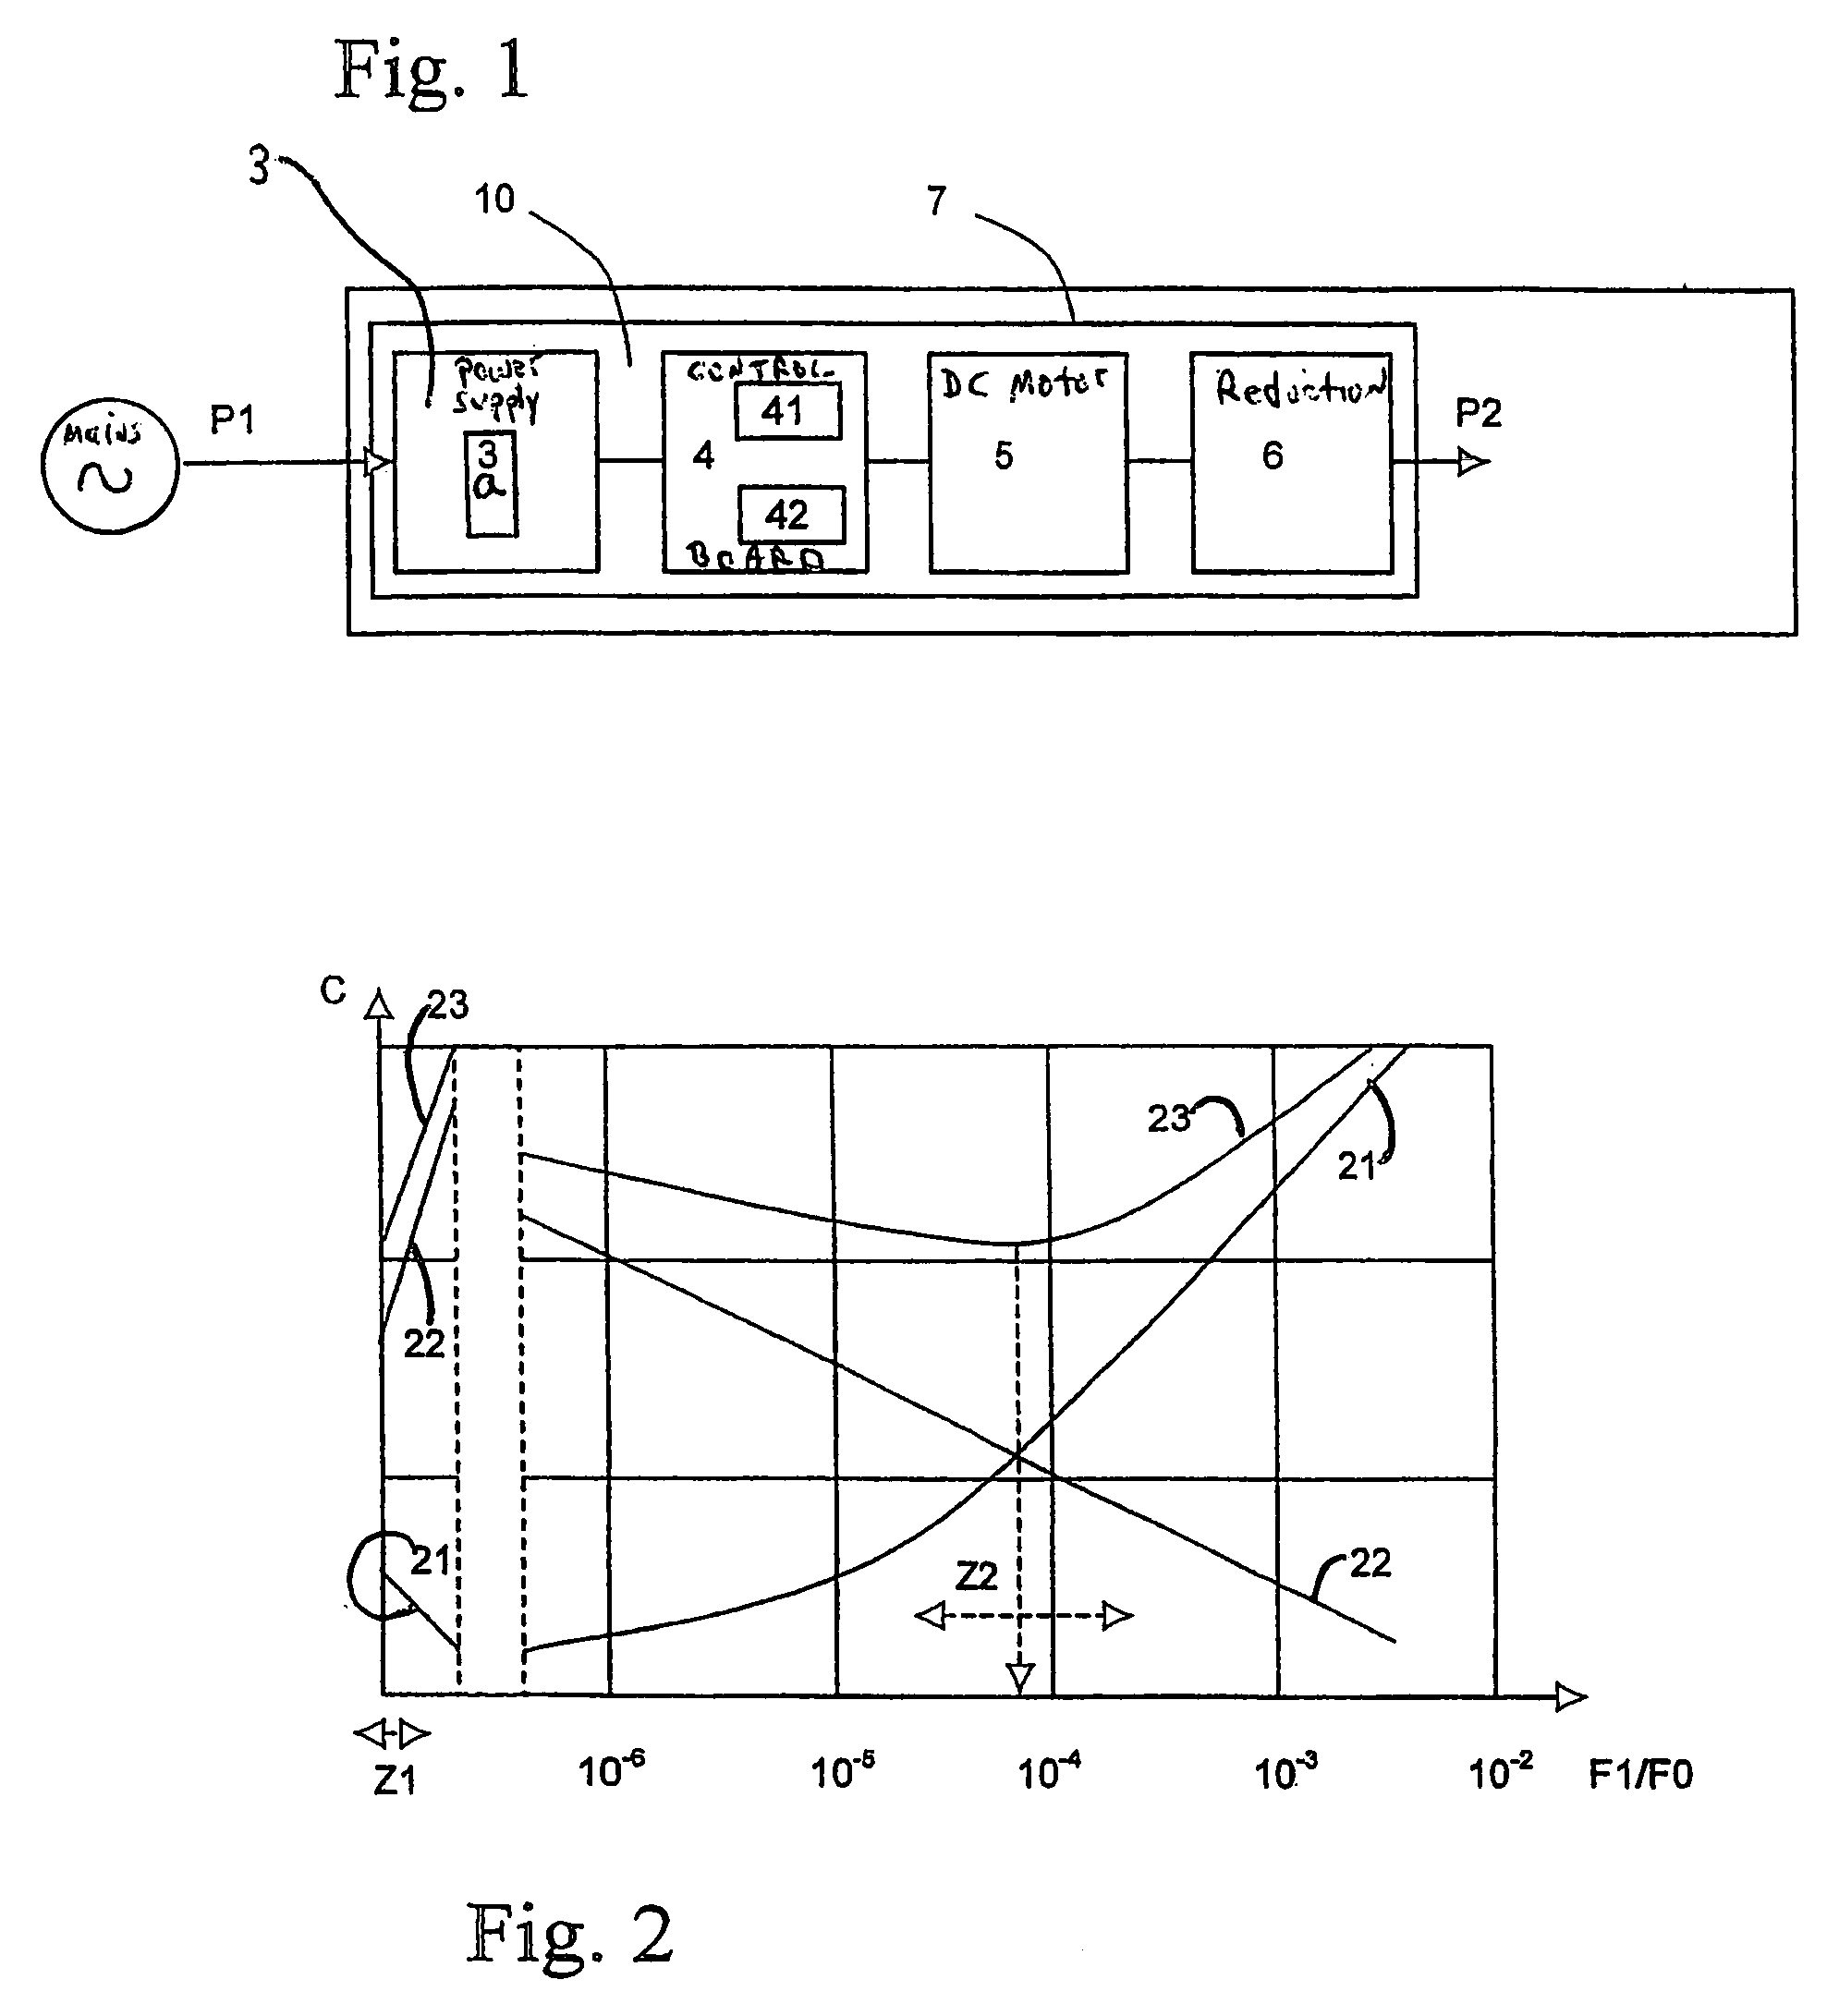 Electrical actuator having a direct current motor